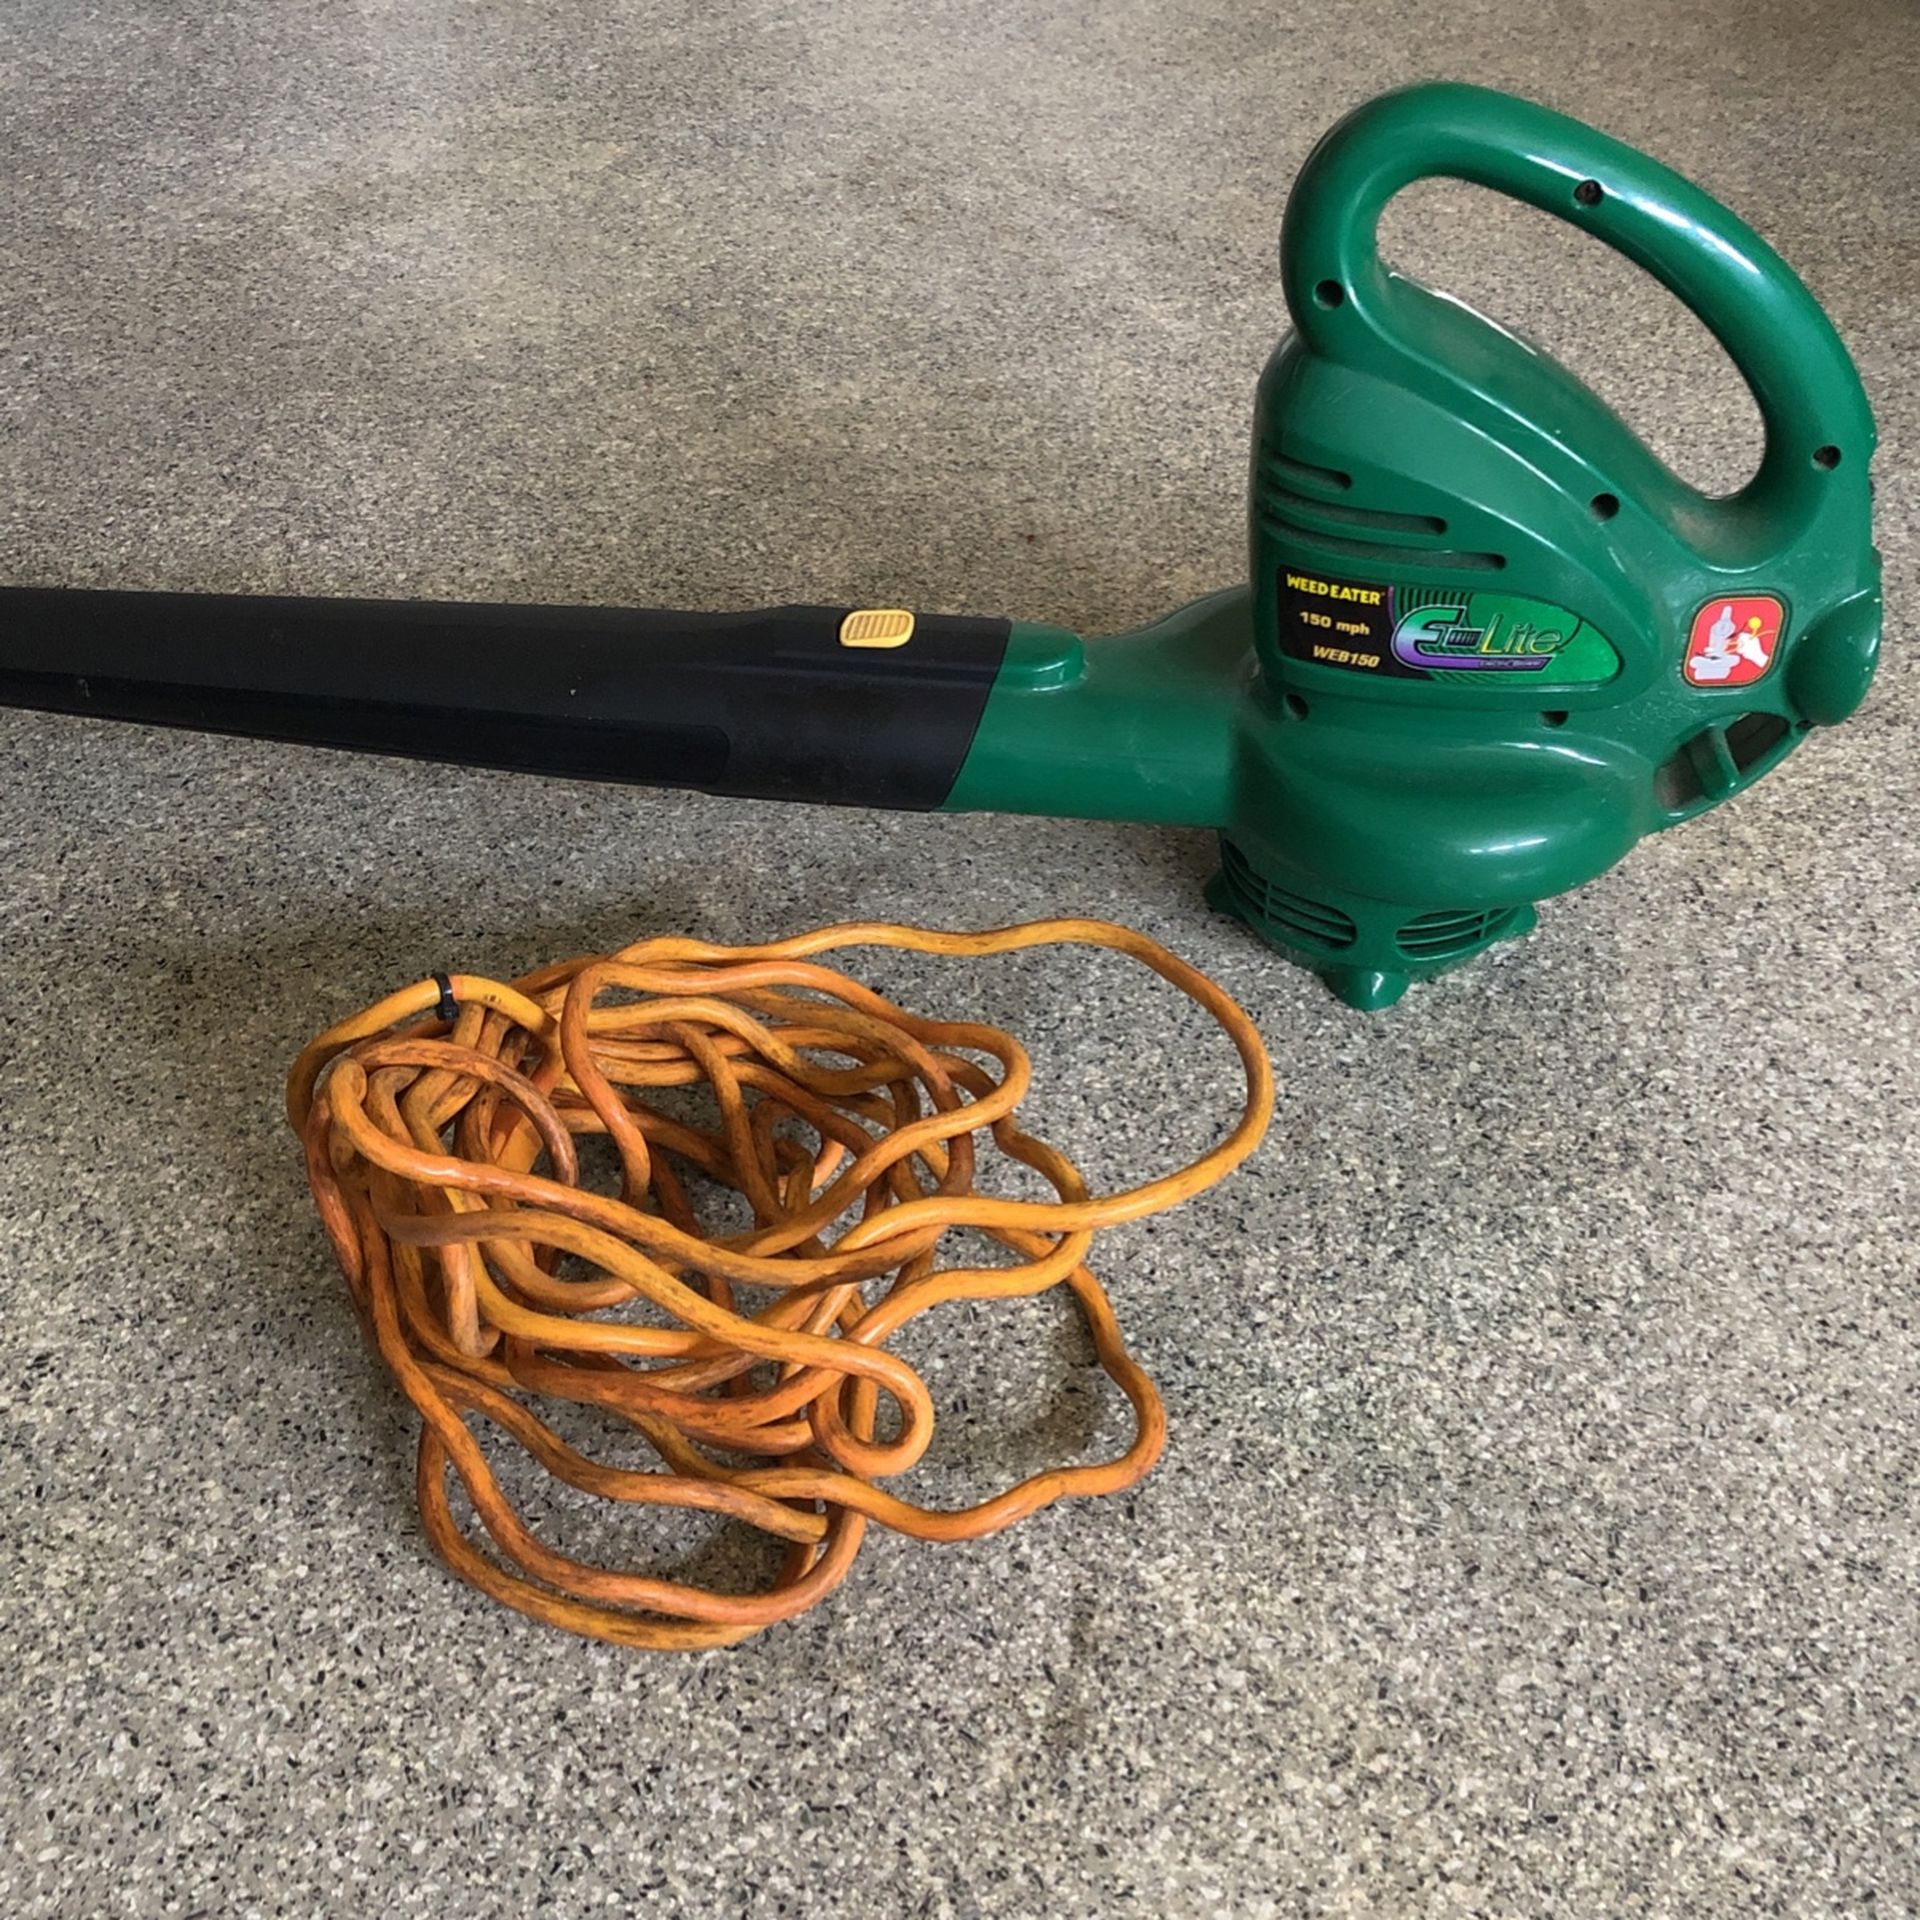 Electric Weed Eater Blower And Cord